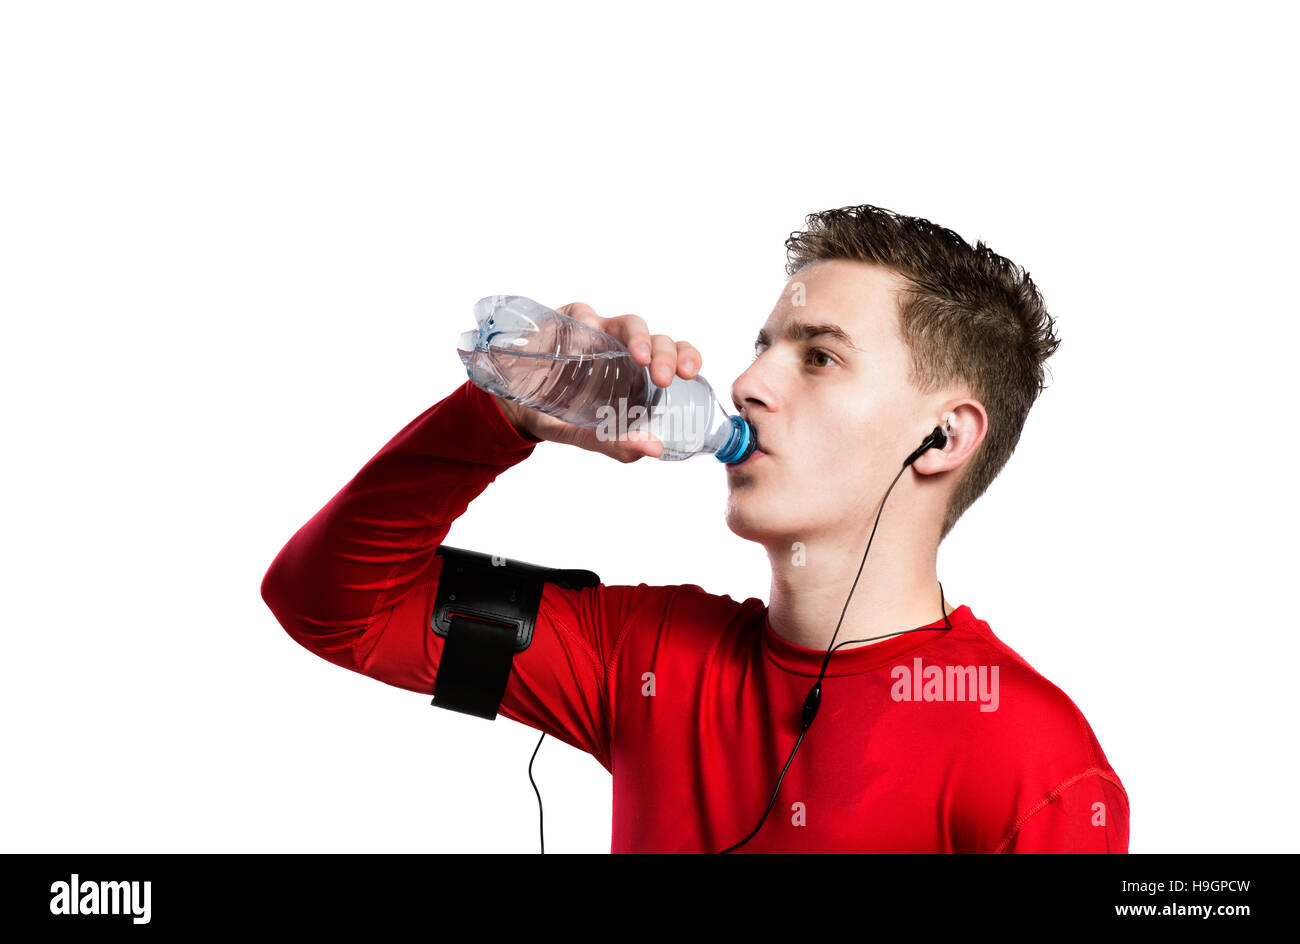 https://c8.alamy.com/comp/H9GPCW/teenage-boy-with-smartphone-and-earphones-drinking-water-isola-H9GPCW.jpg